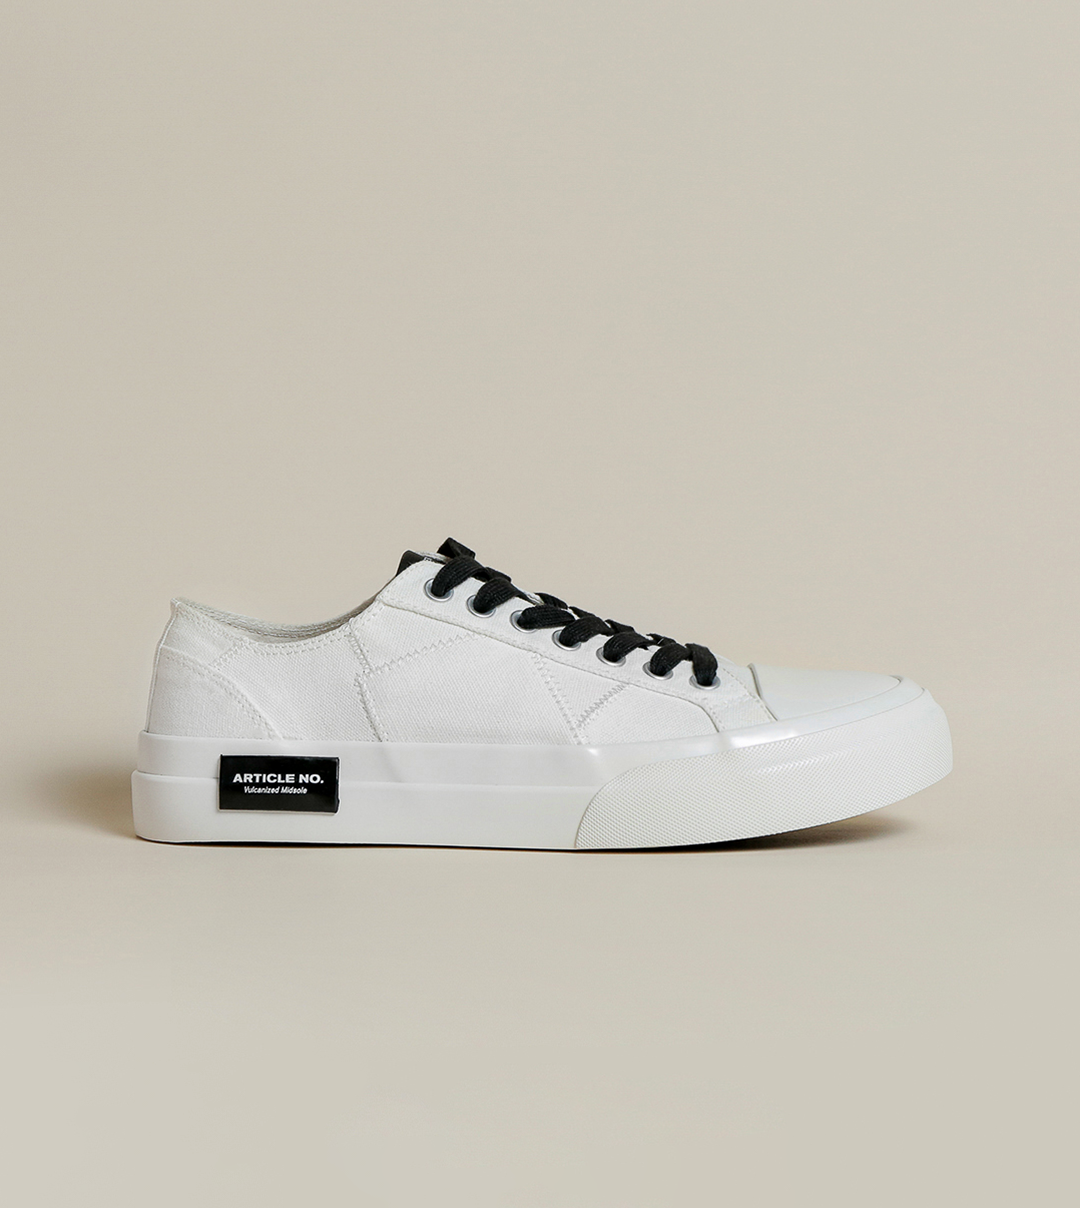 O.G. CLASSIC PATCHWORK WHITE SNEAKERS